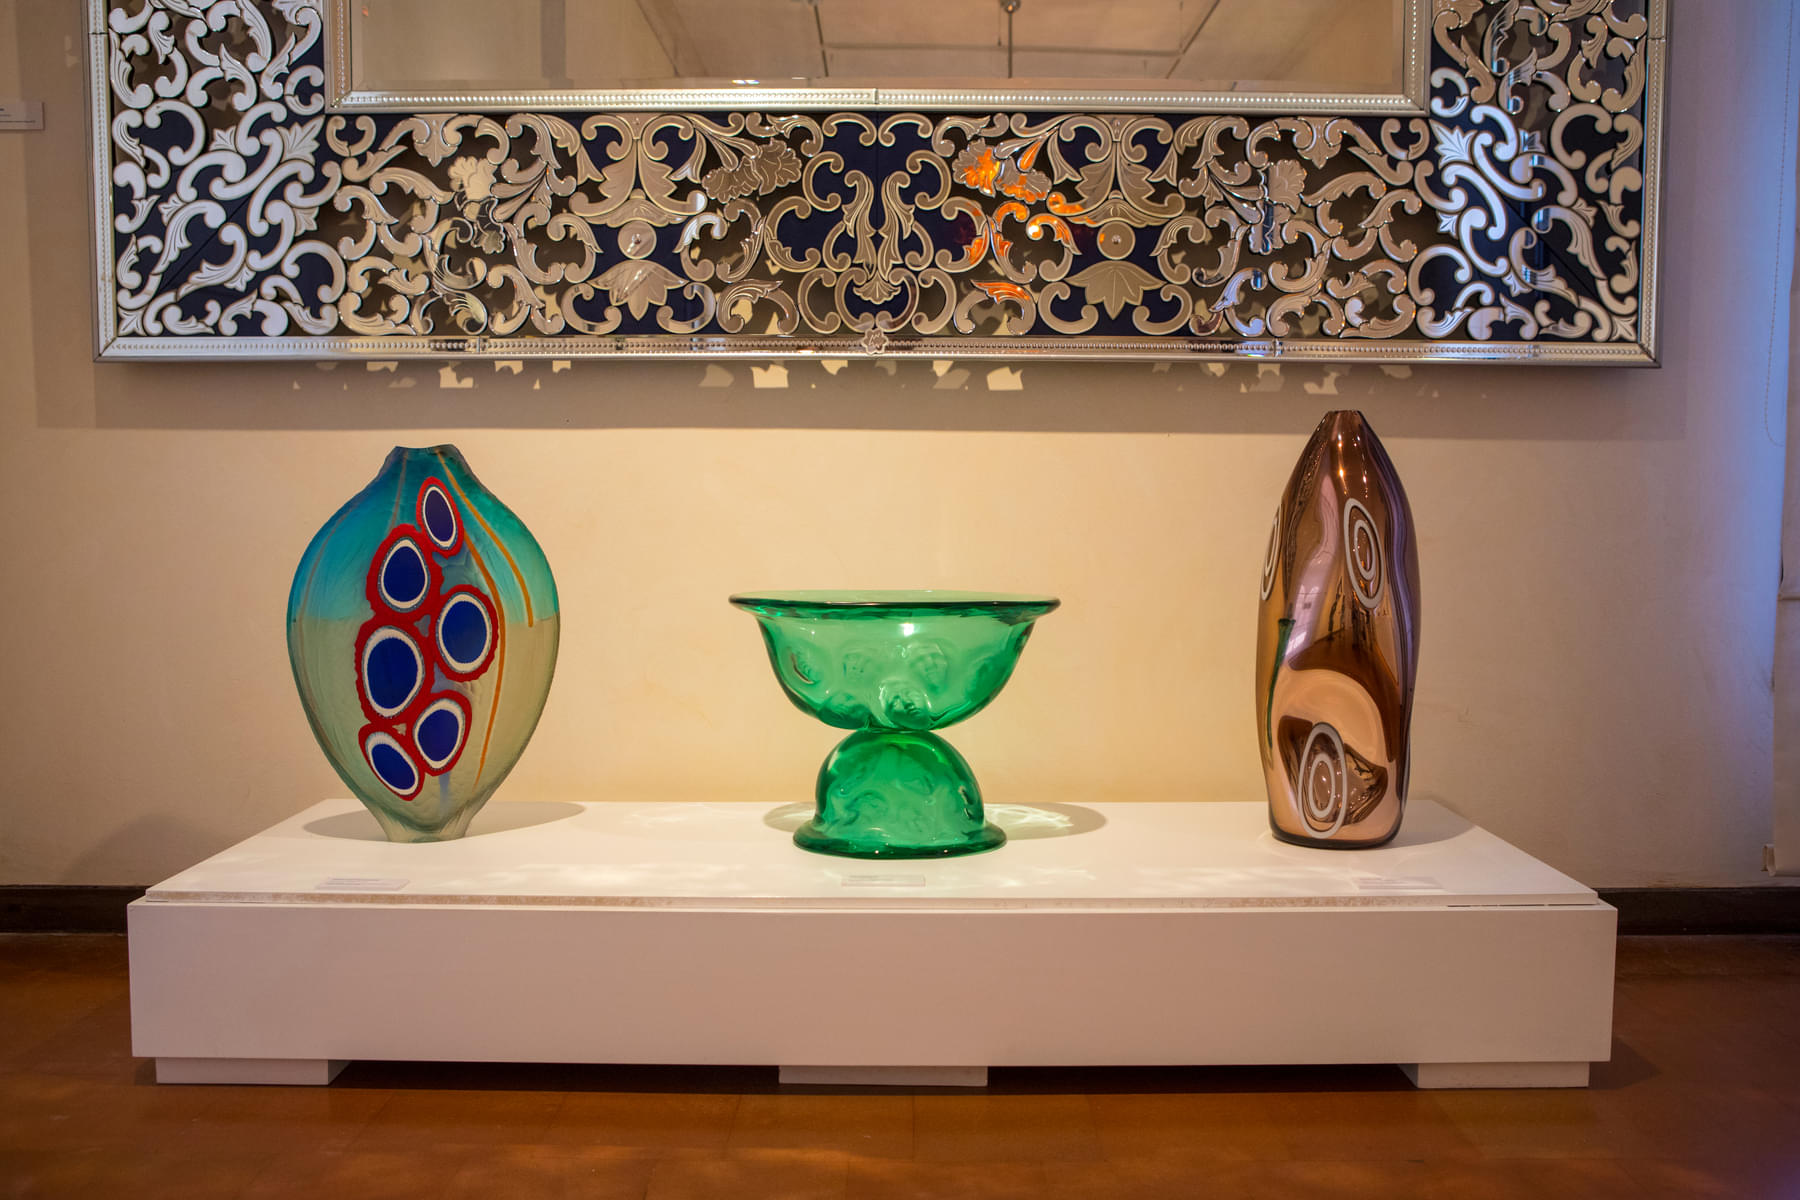 See some of the antiques pieces of Murano Glass in the museum